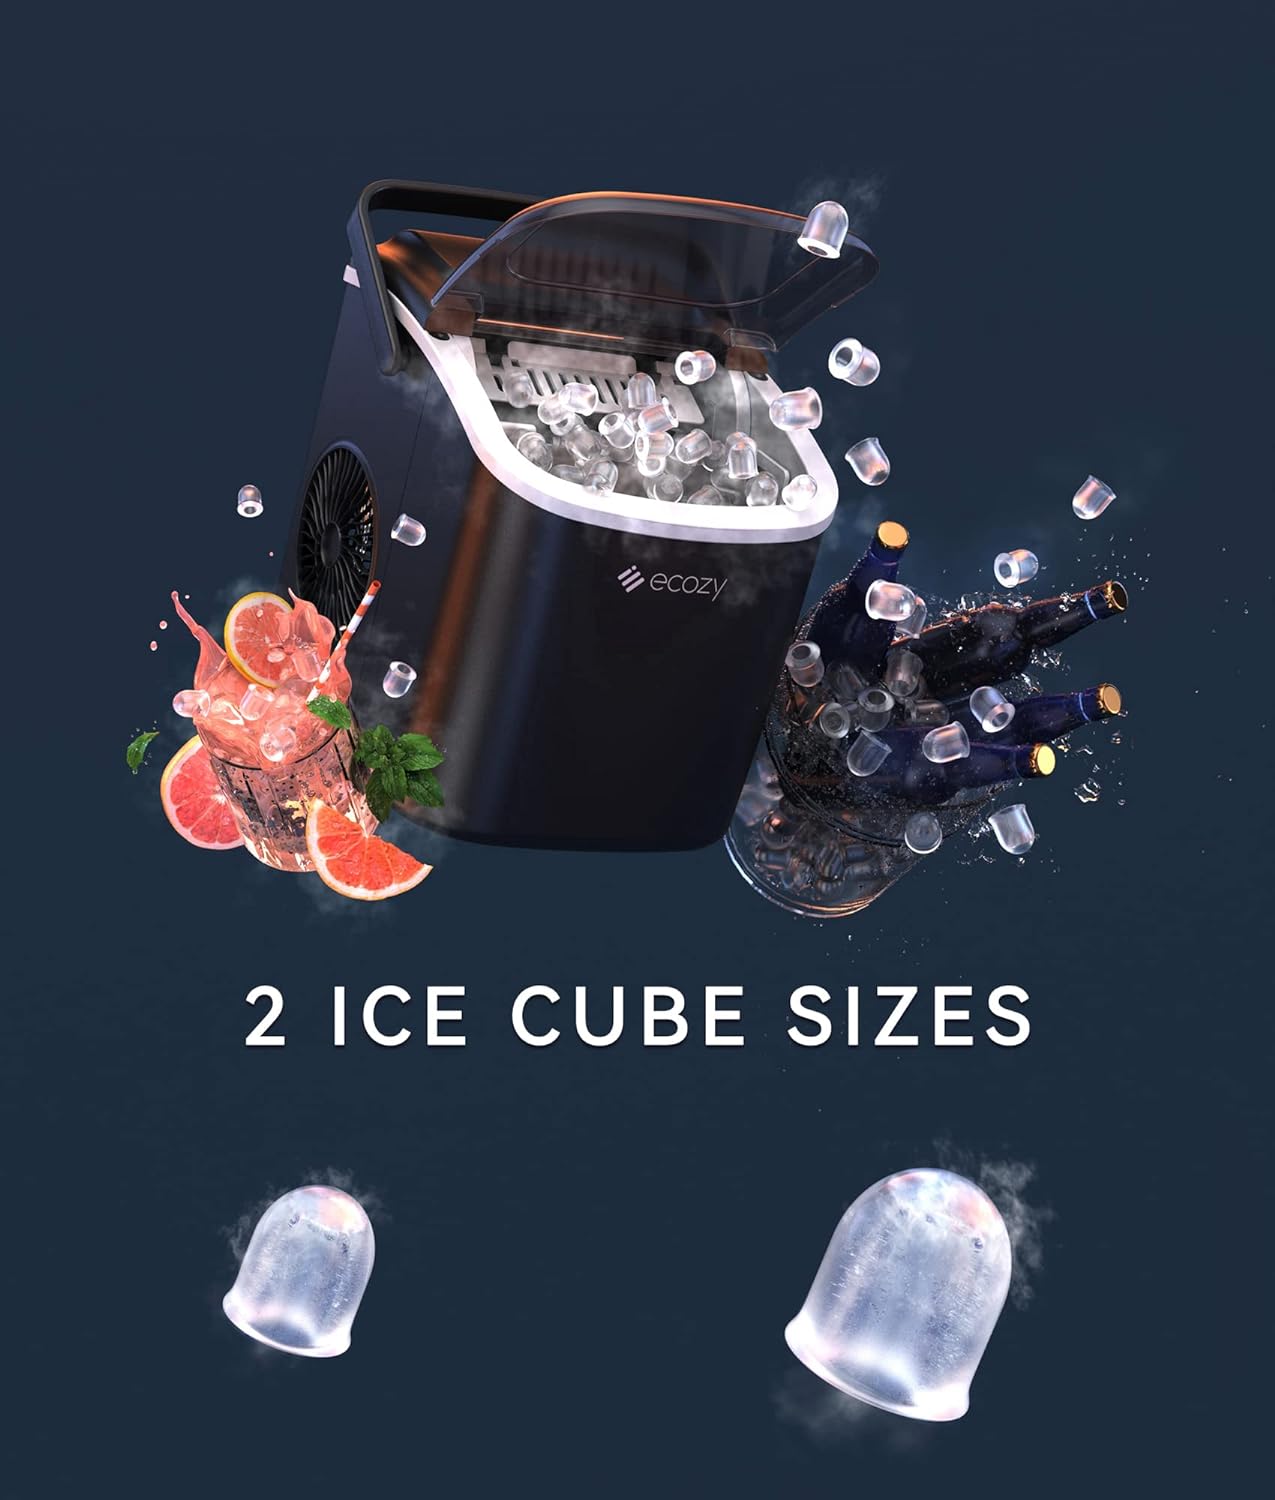 ecozy Portable Countertop Ice Maker - 9 Ice Cubes in 6 Minutes, 26